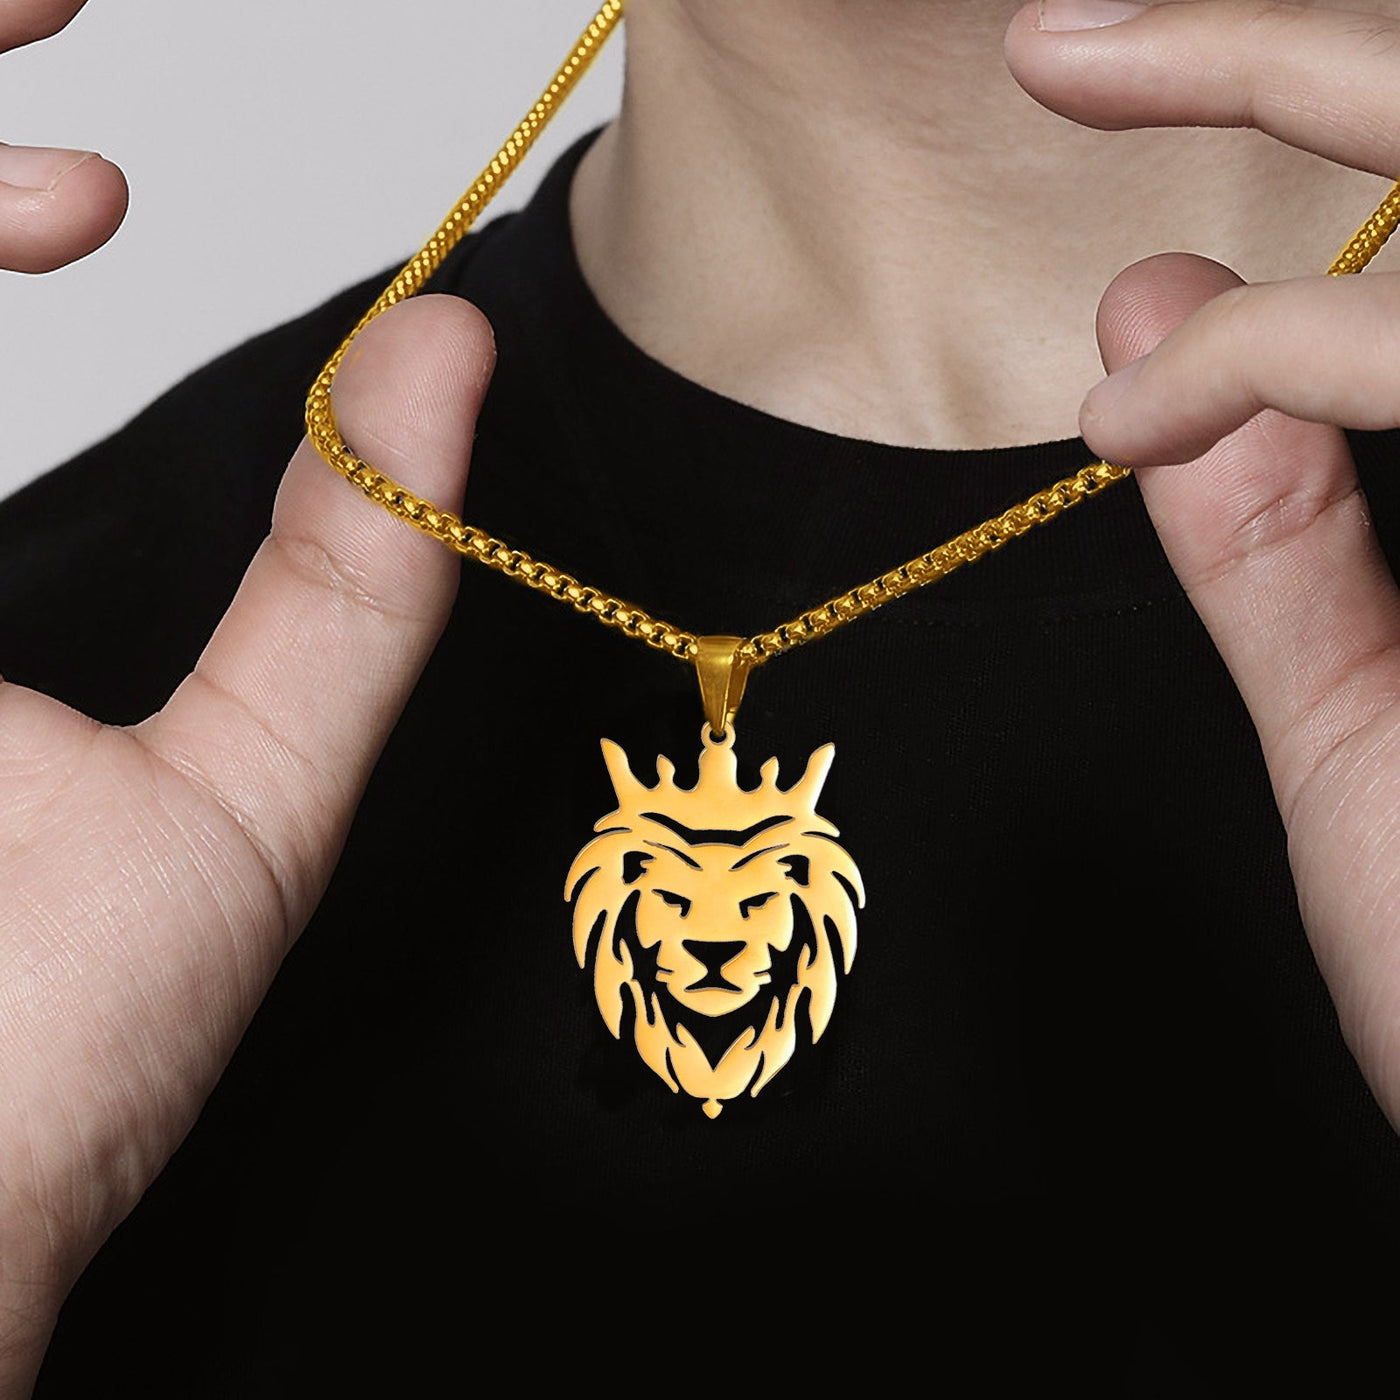 New Stainless Steel Lion Pendant Necklace